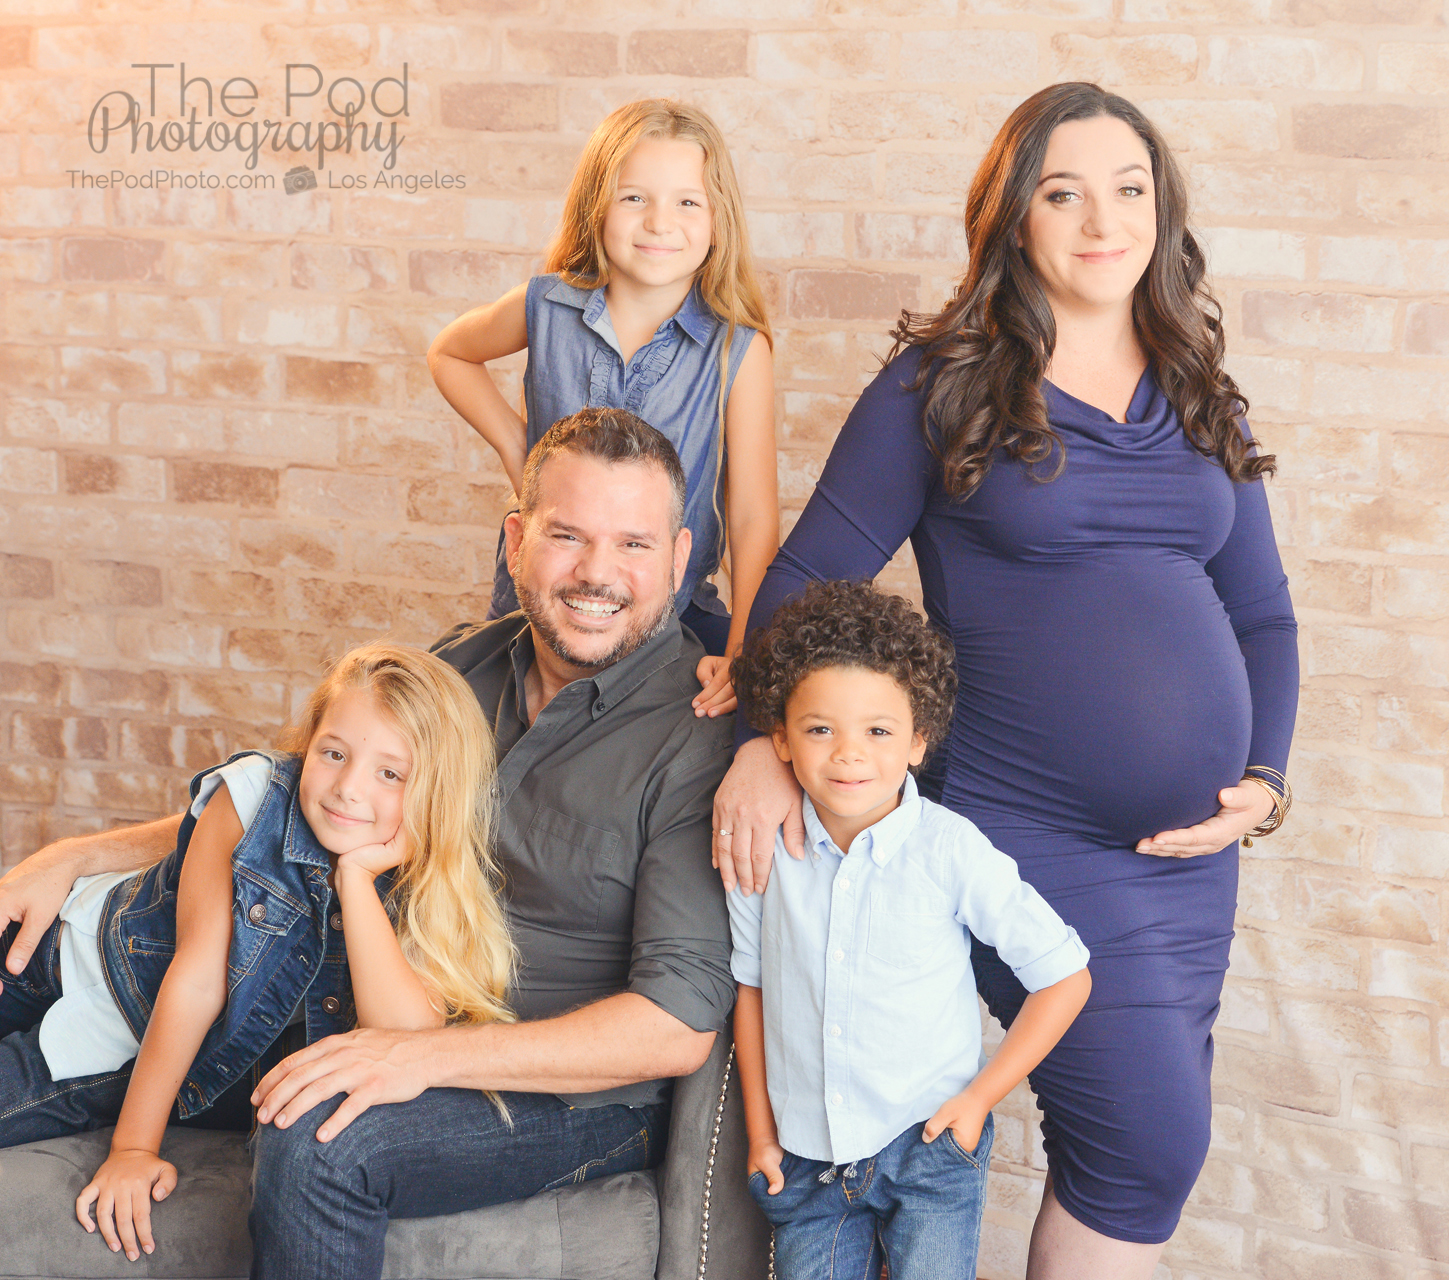 https://blog.thepodphoto.com/wp-content/uploads/2016/10/hollywood-maternity-extended-family-photography.jpg